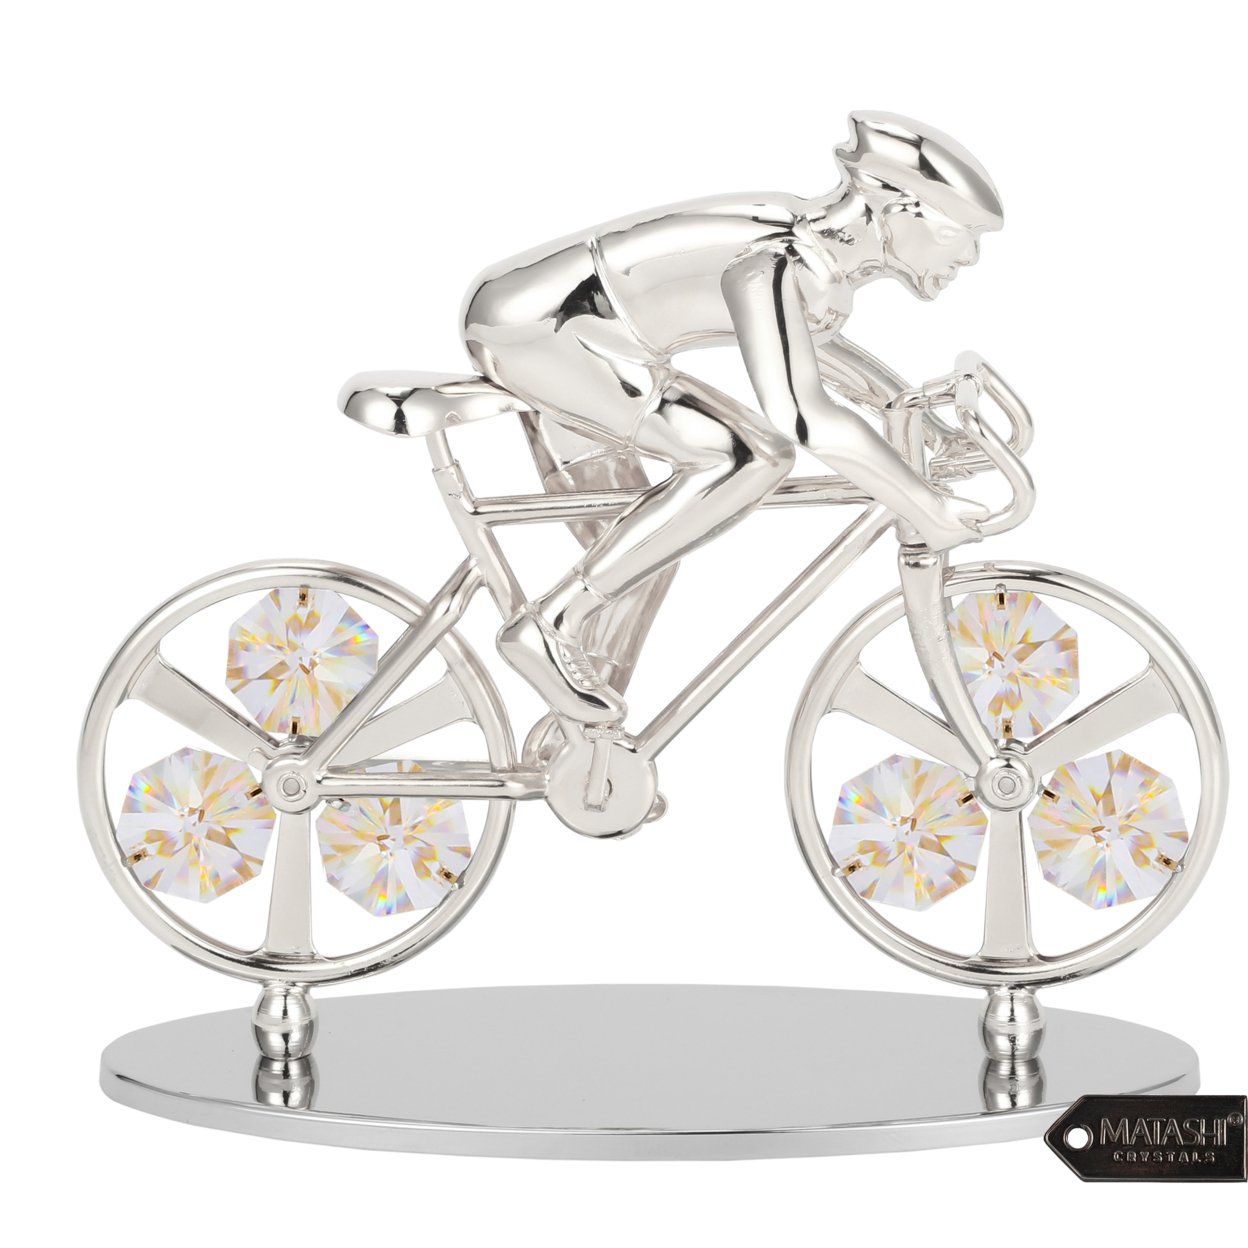 Matashi Silver Plated Cyclist On Bicycle Figurine With Crystals, Gift For Sports Fan, Desk Accessories, Trophy, Boss Gift, Office Decor